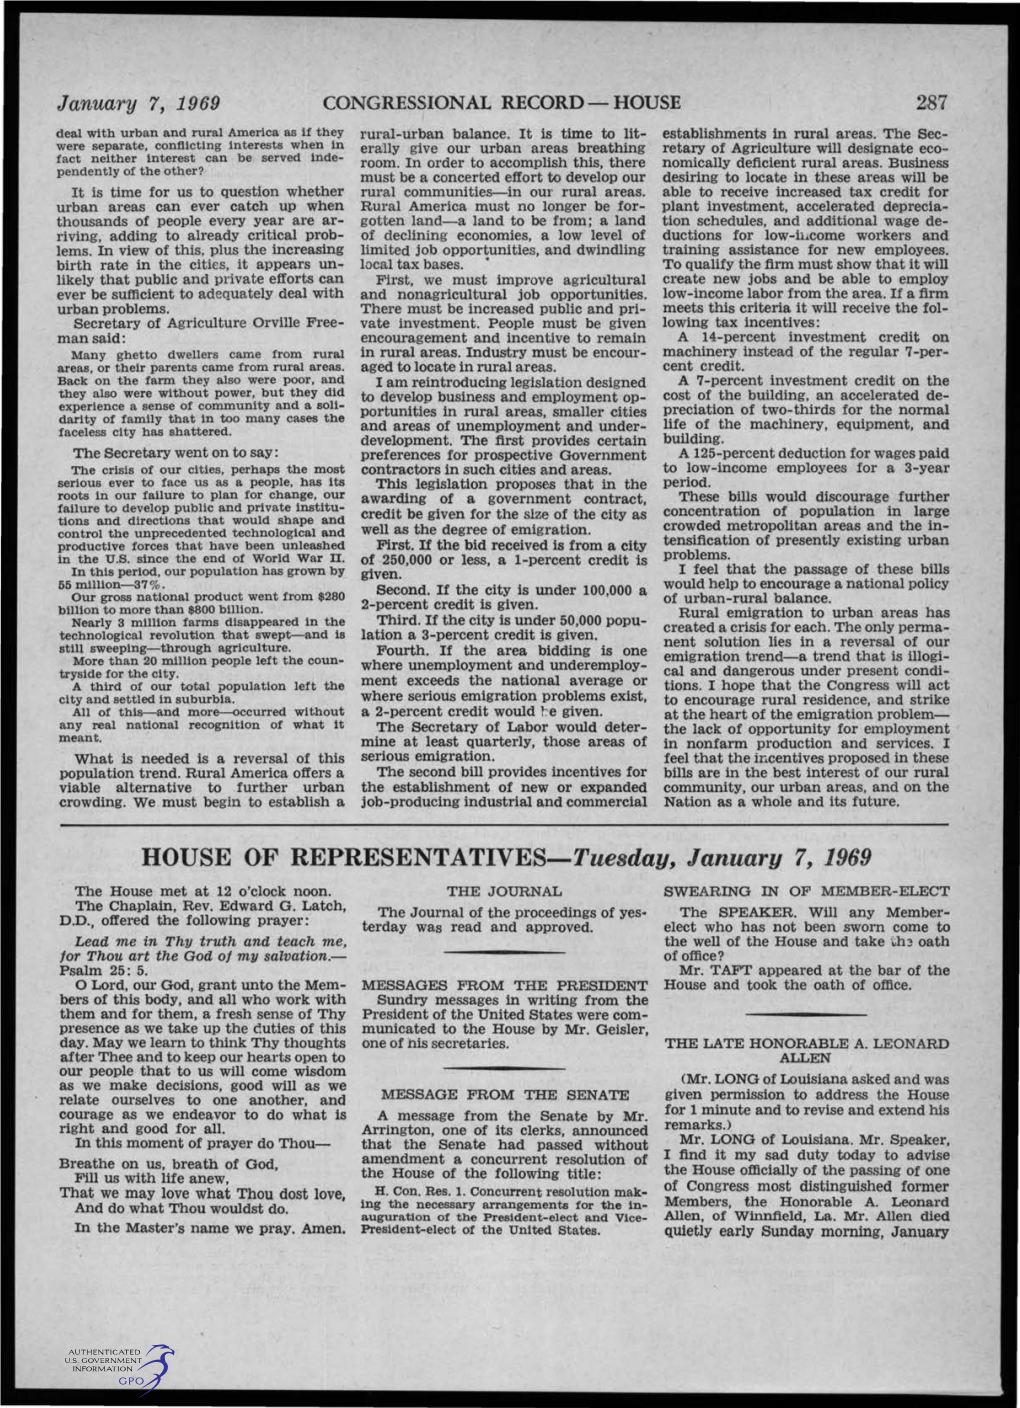 HOUSE of REPRESENTATIVES-Tuesday, January 7, 1969 the House Met at 12 O'clock Noon